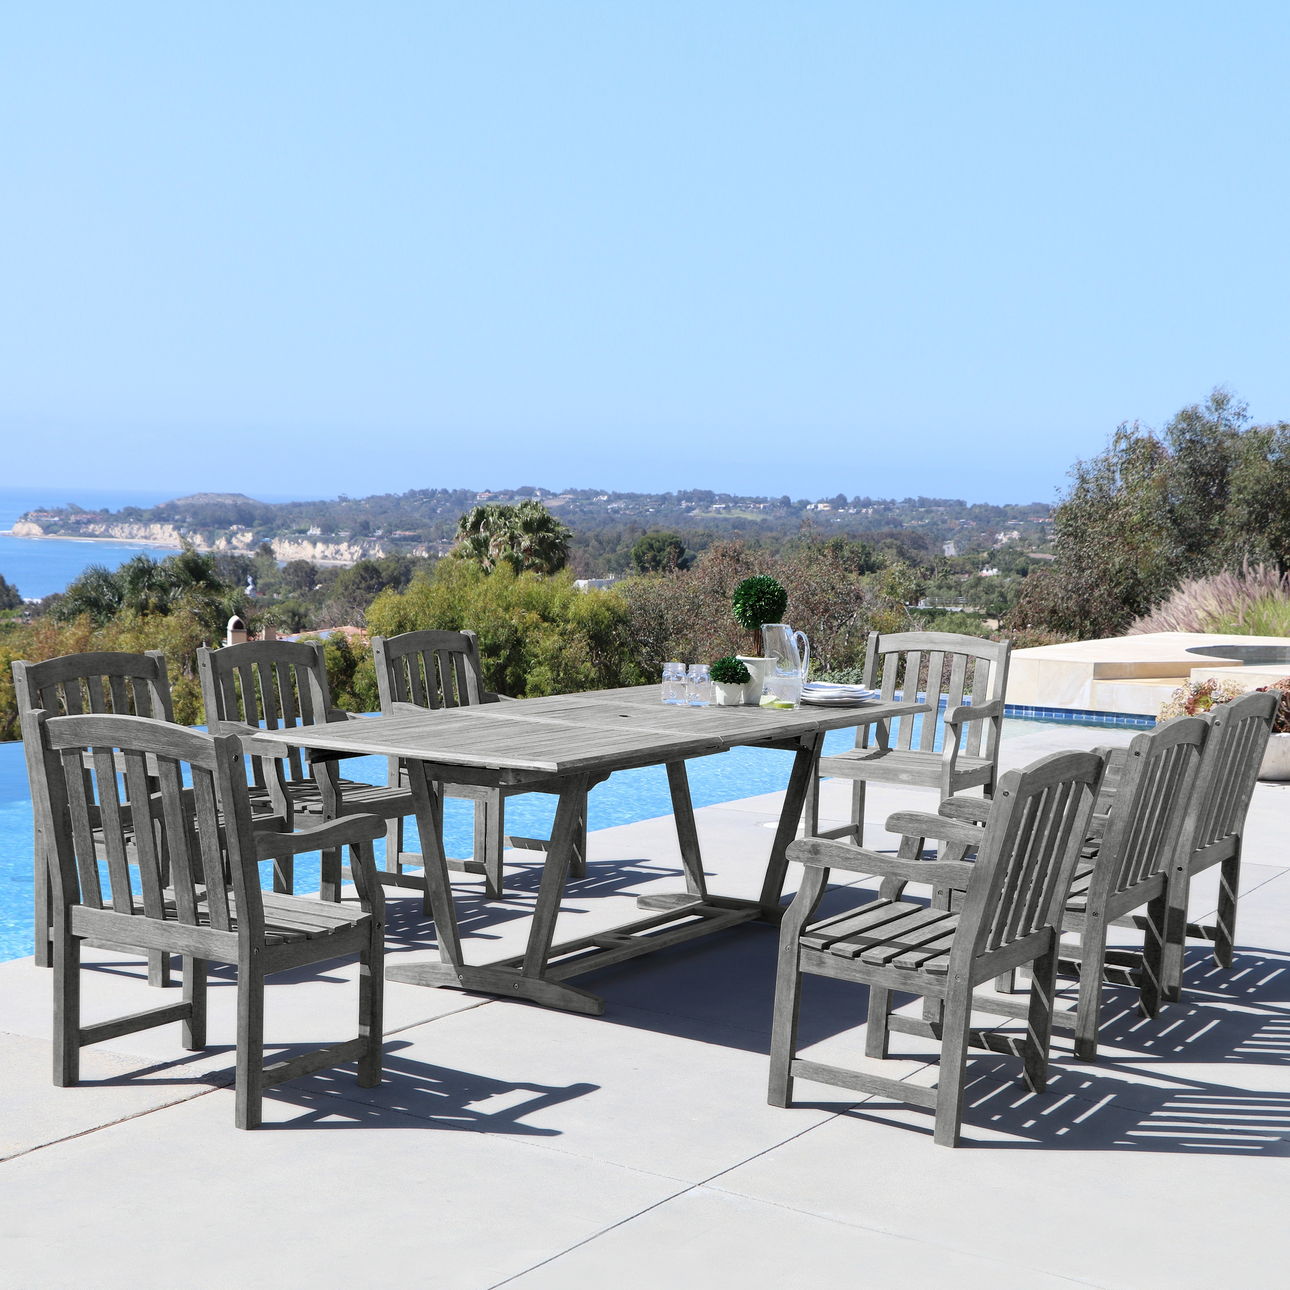 Renaissance Outdoor 9-piece Hand-scraped Wood Patio Dining Set with Extension Table